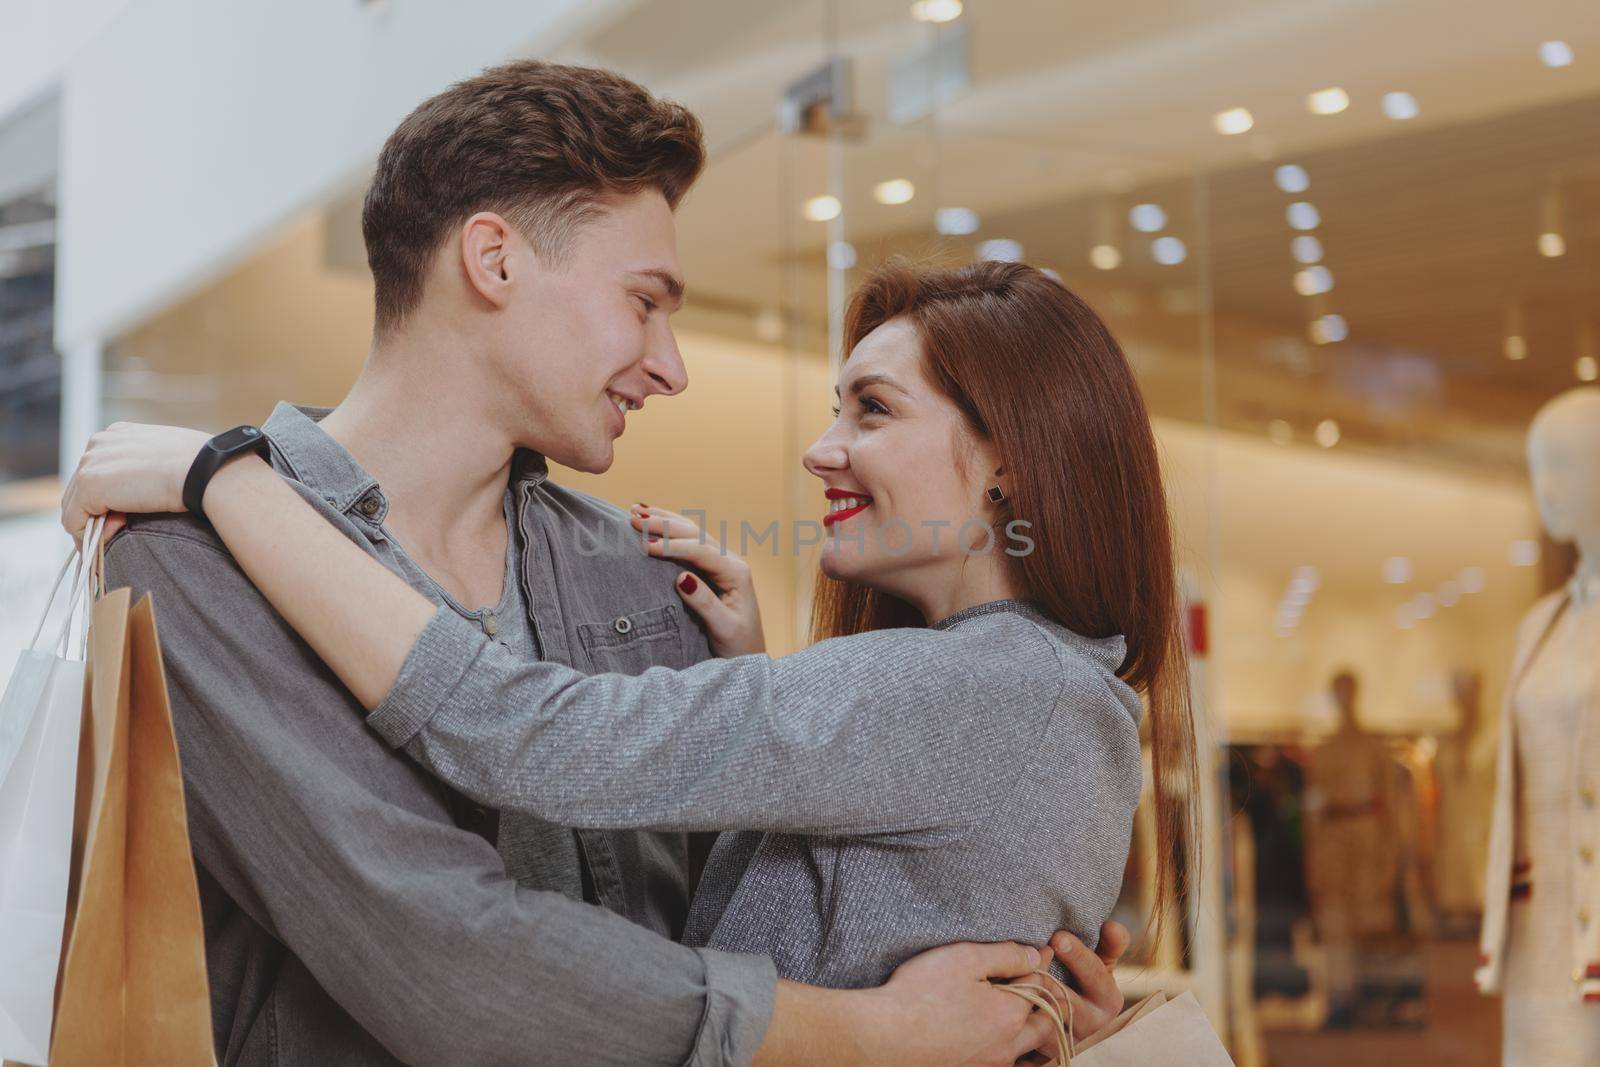 Happy young couple hugging, smiling at each other at the shopping mall. Young man embracing his girlfriend while shopping at the mall together. Love, anniversary, couples concept